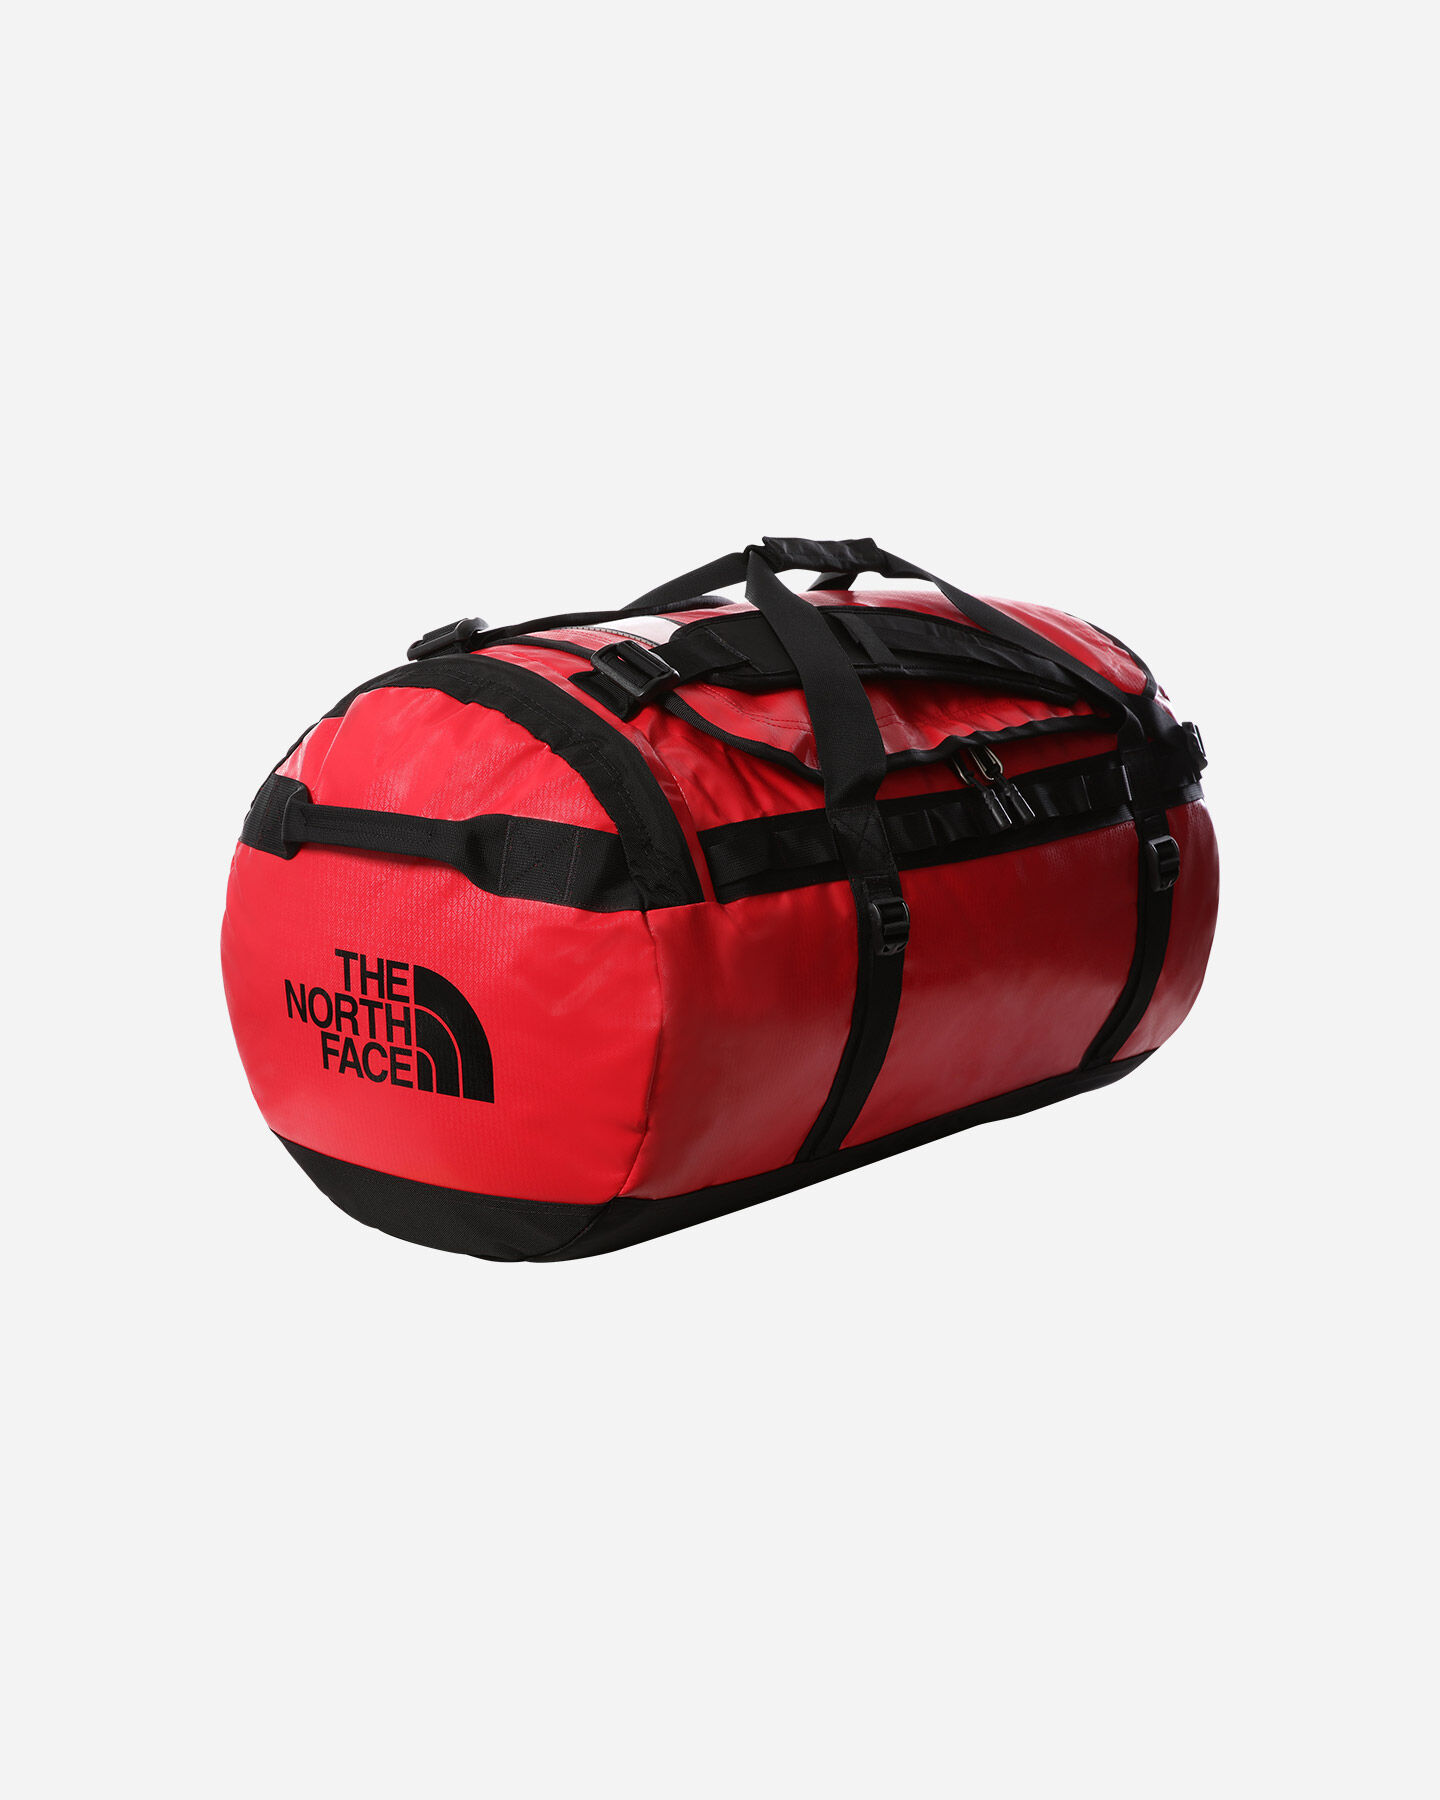  Borsa THE NORTH FACE BASE CAMP DUFFEL LARGE SUMMIT S5347749|KZ3|OS scatto 0